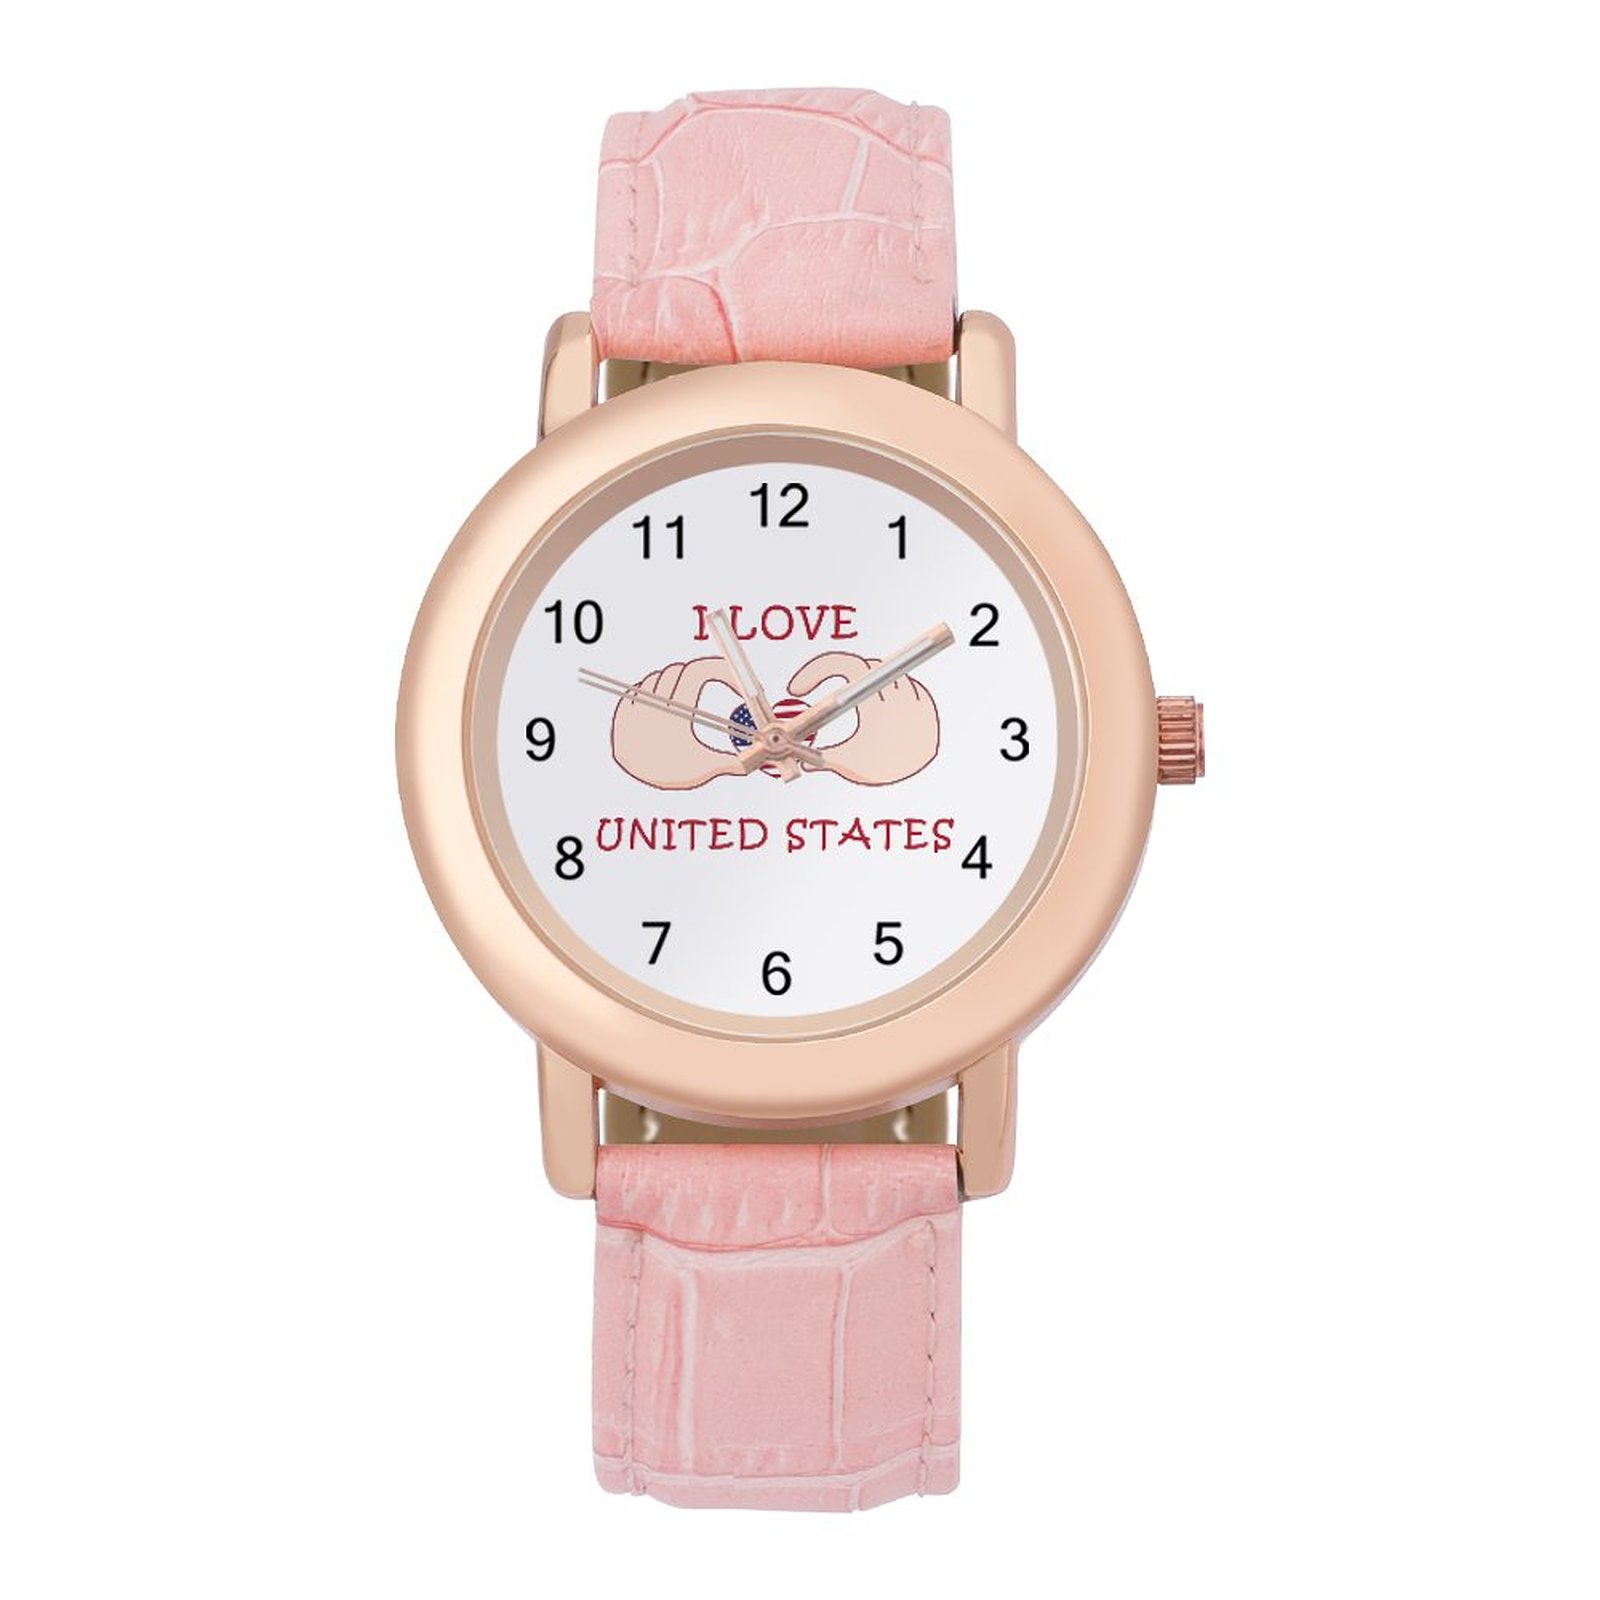 I Love United States Women's Leather Strap Watch